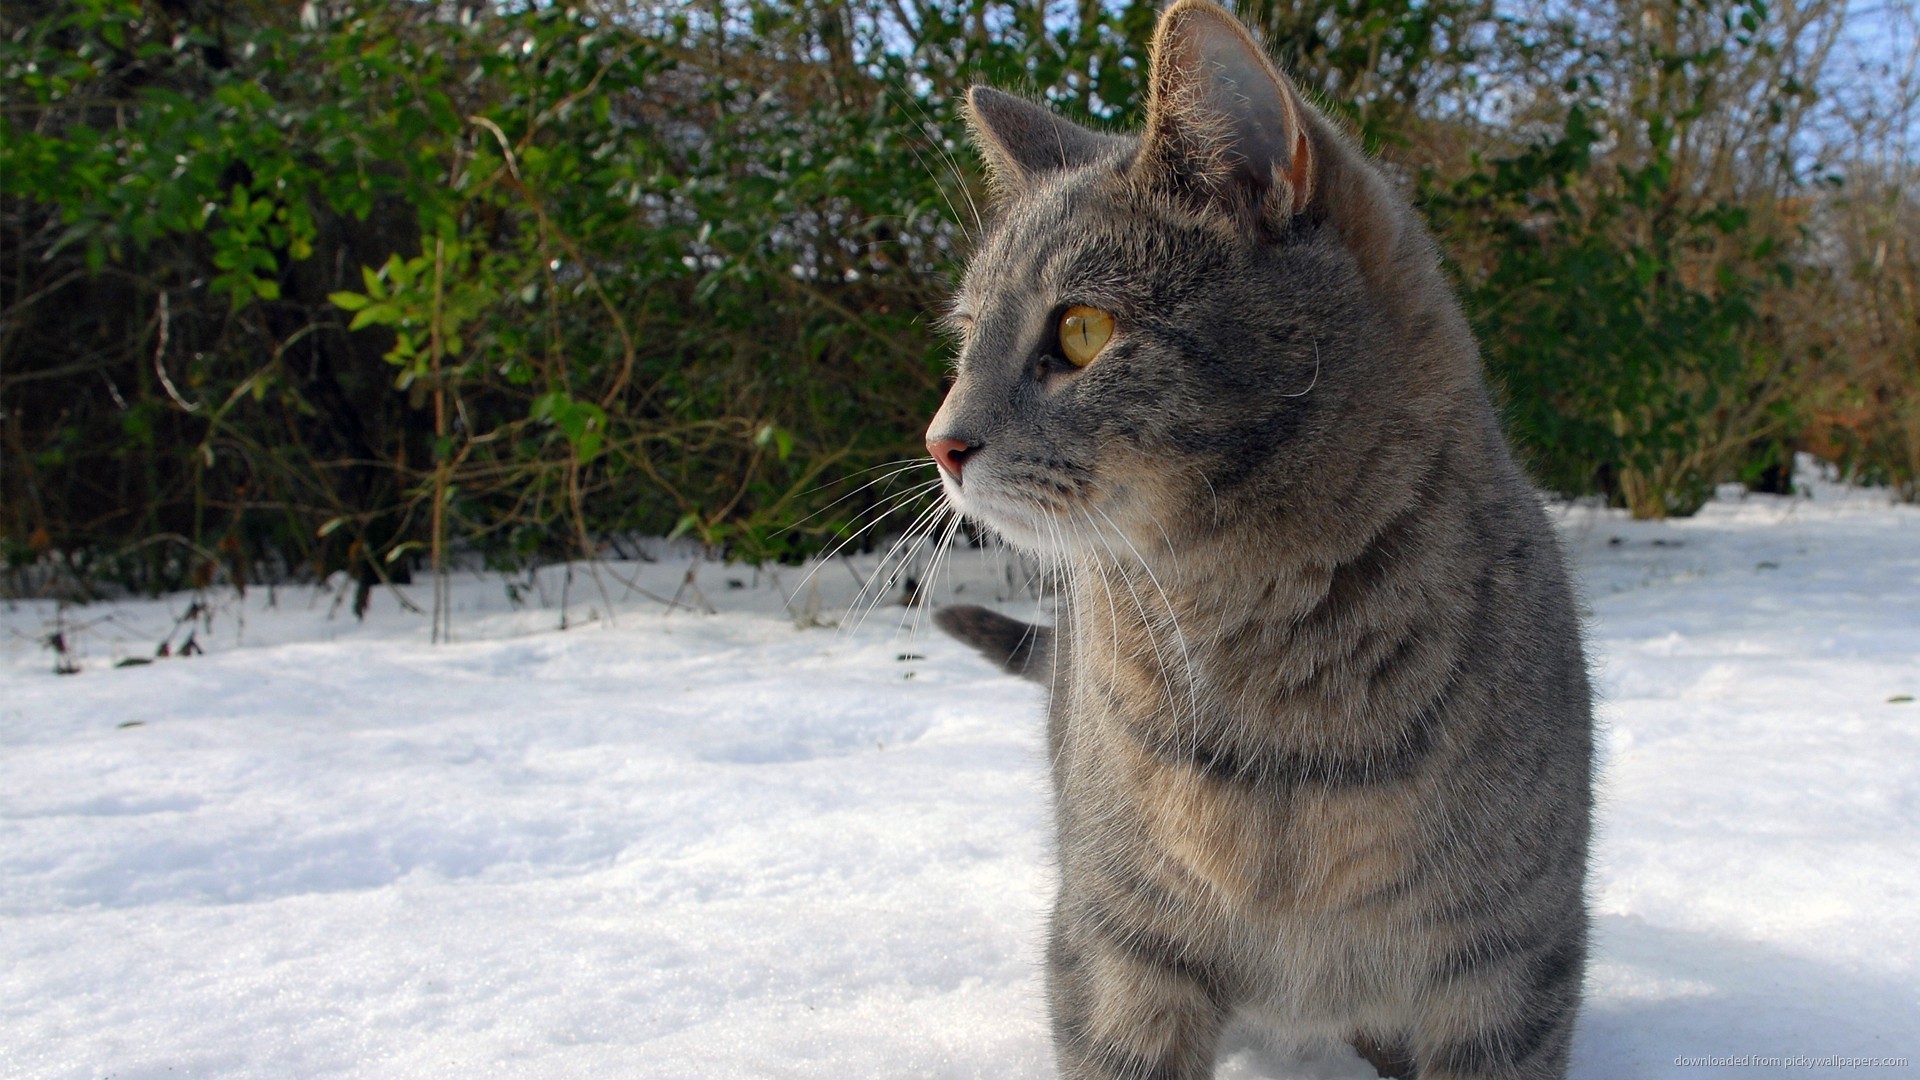 Download 1920x1080 Determined Cat In The Snow Wallpaper 1920x1080